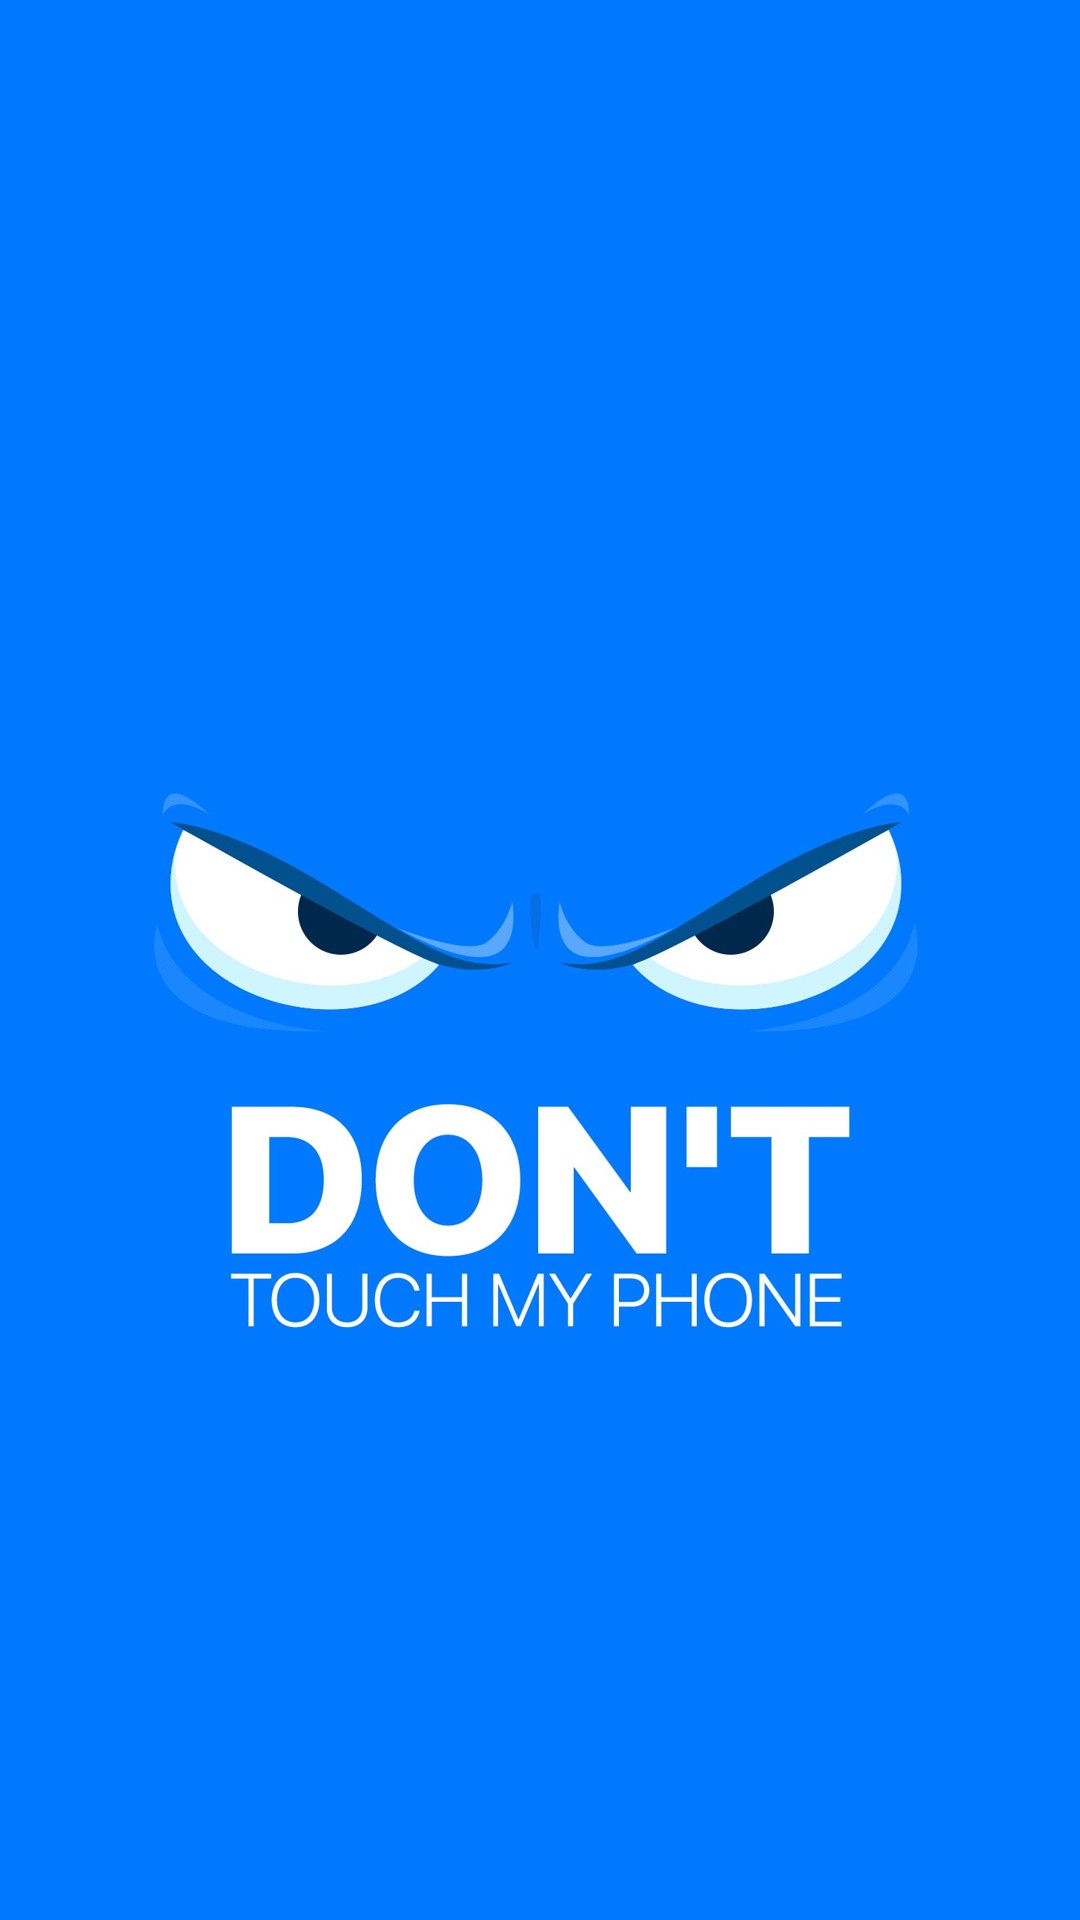 Dont Touch My Phone 1 1080x1920 340x220. Dont touch my phone